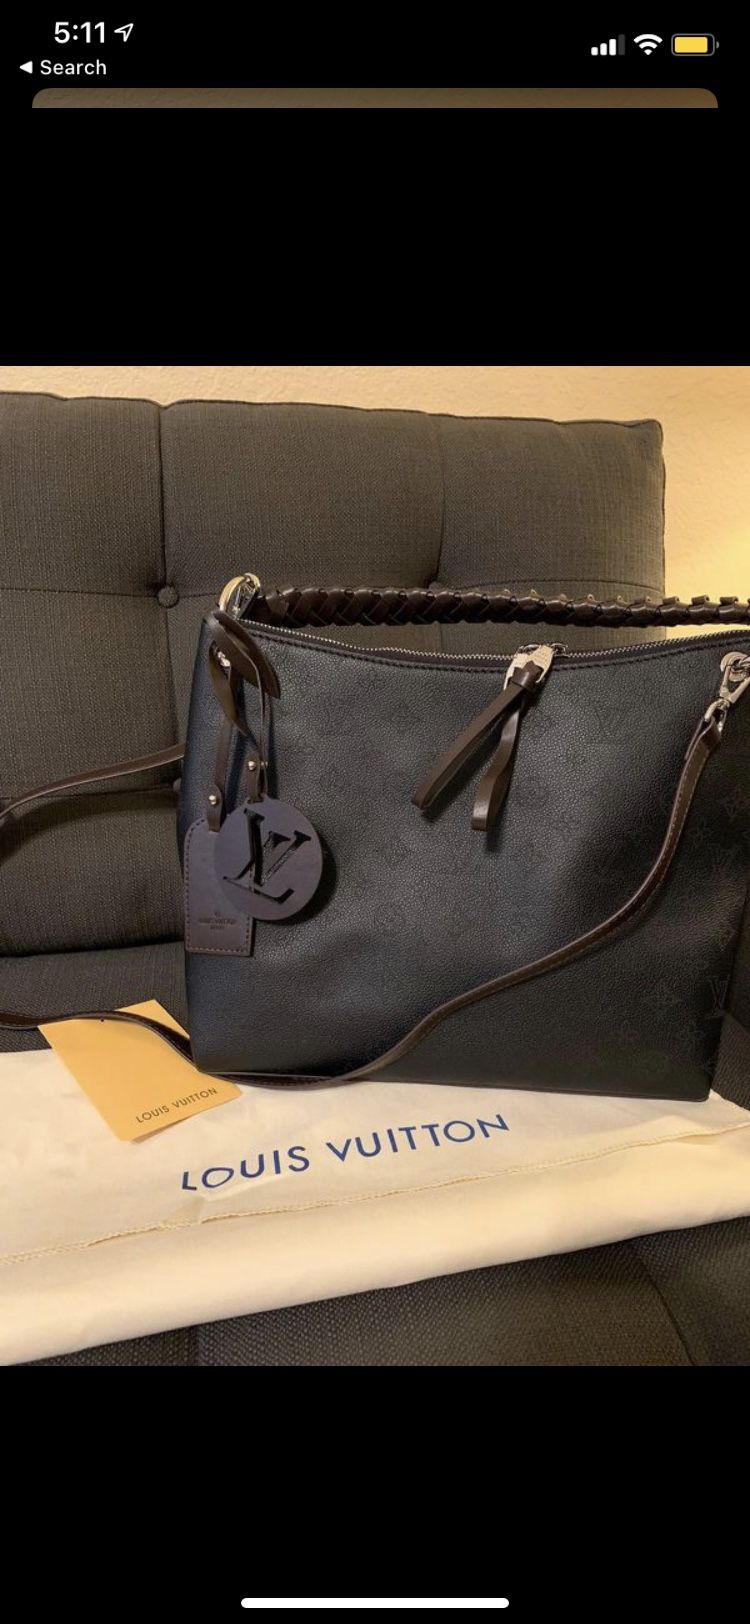 louis vuitton, new bag, last unit available for pickup, we deliver with a small fee.